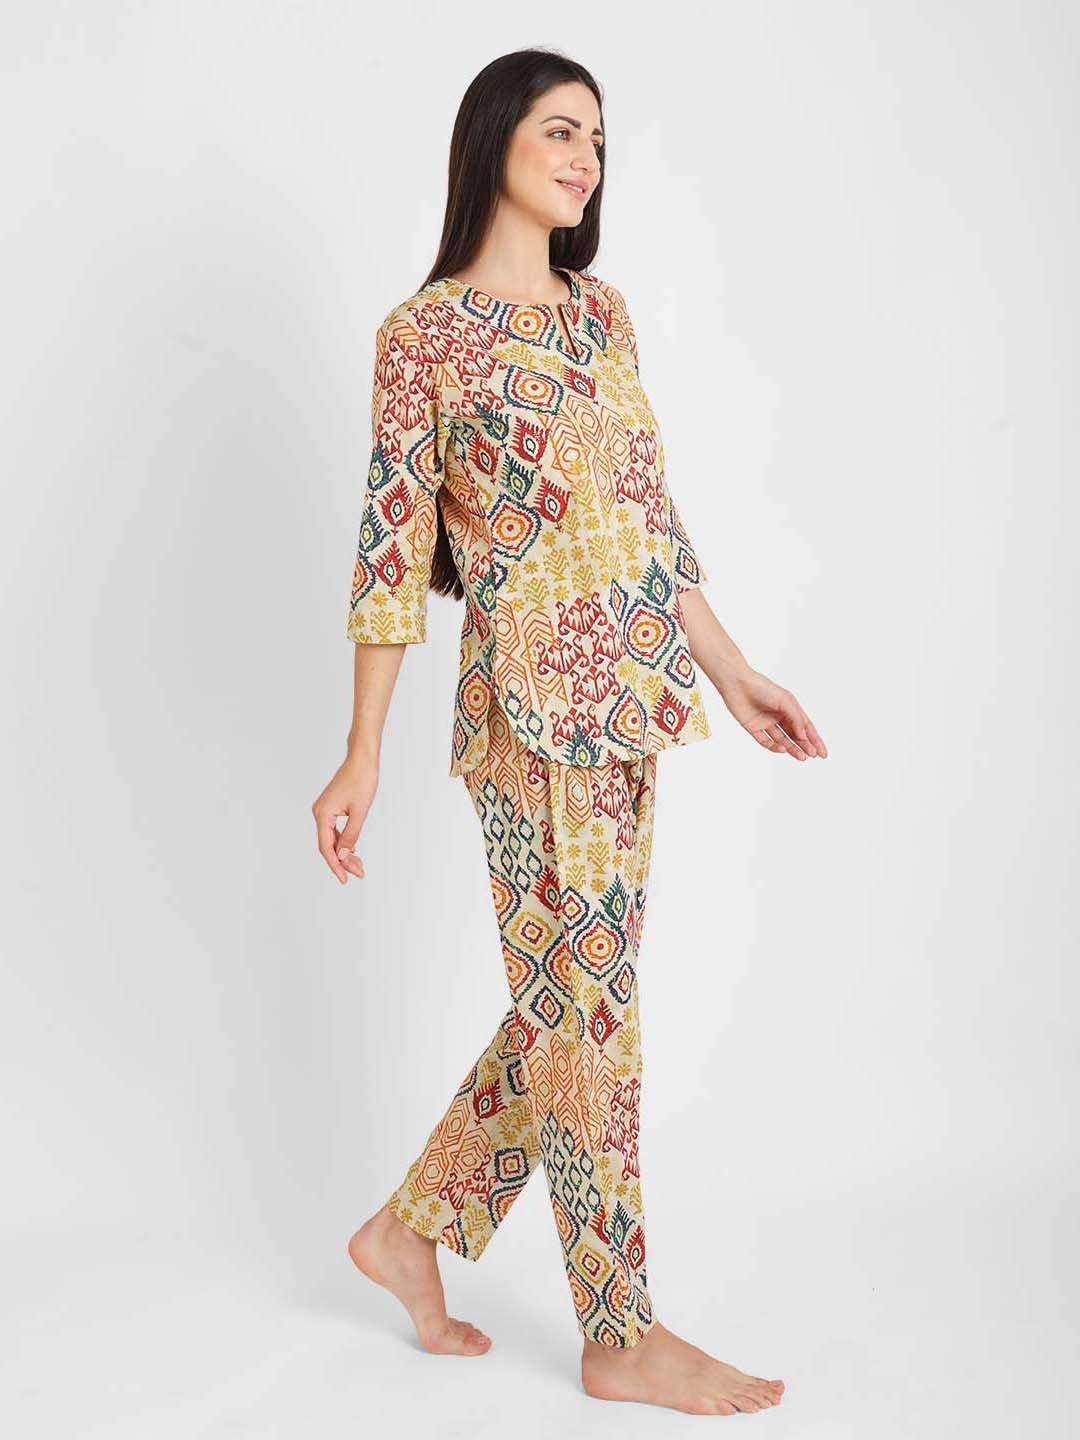 Ikat is Love Printed Nightsuit Set for Women